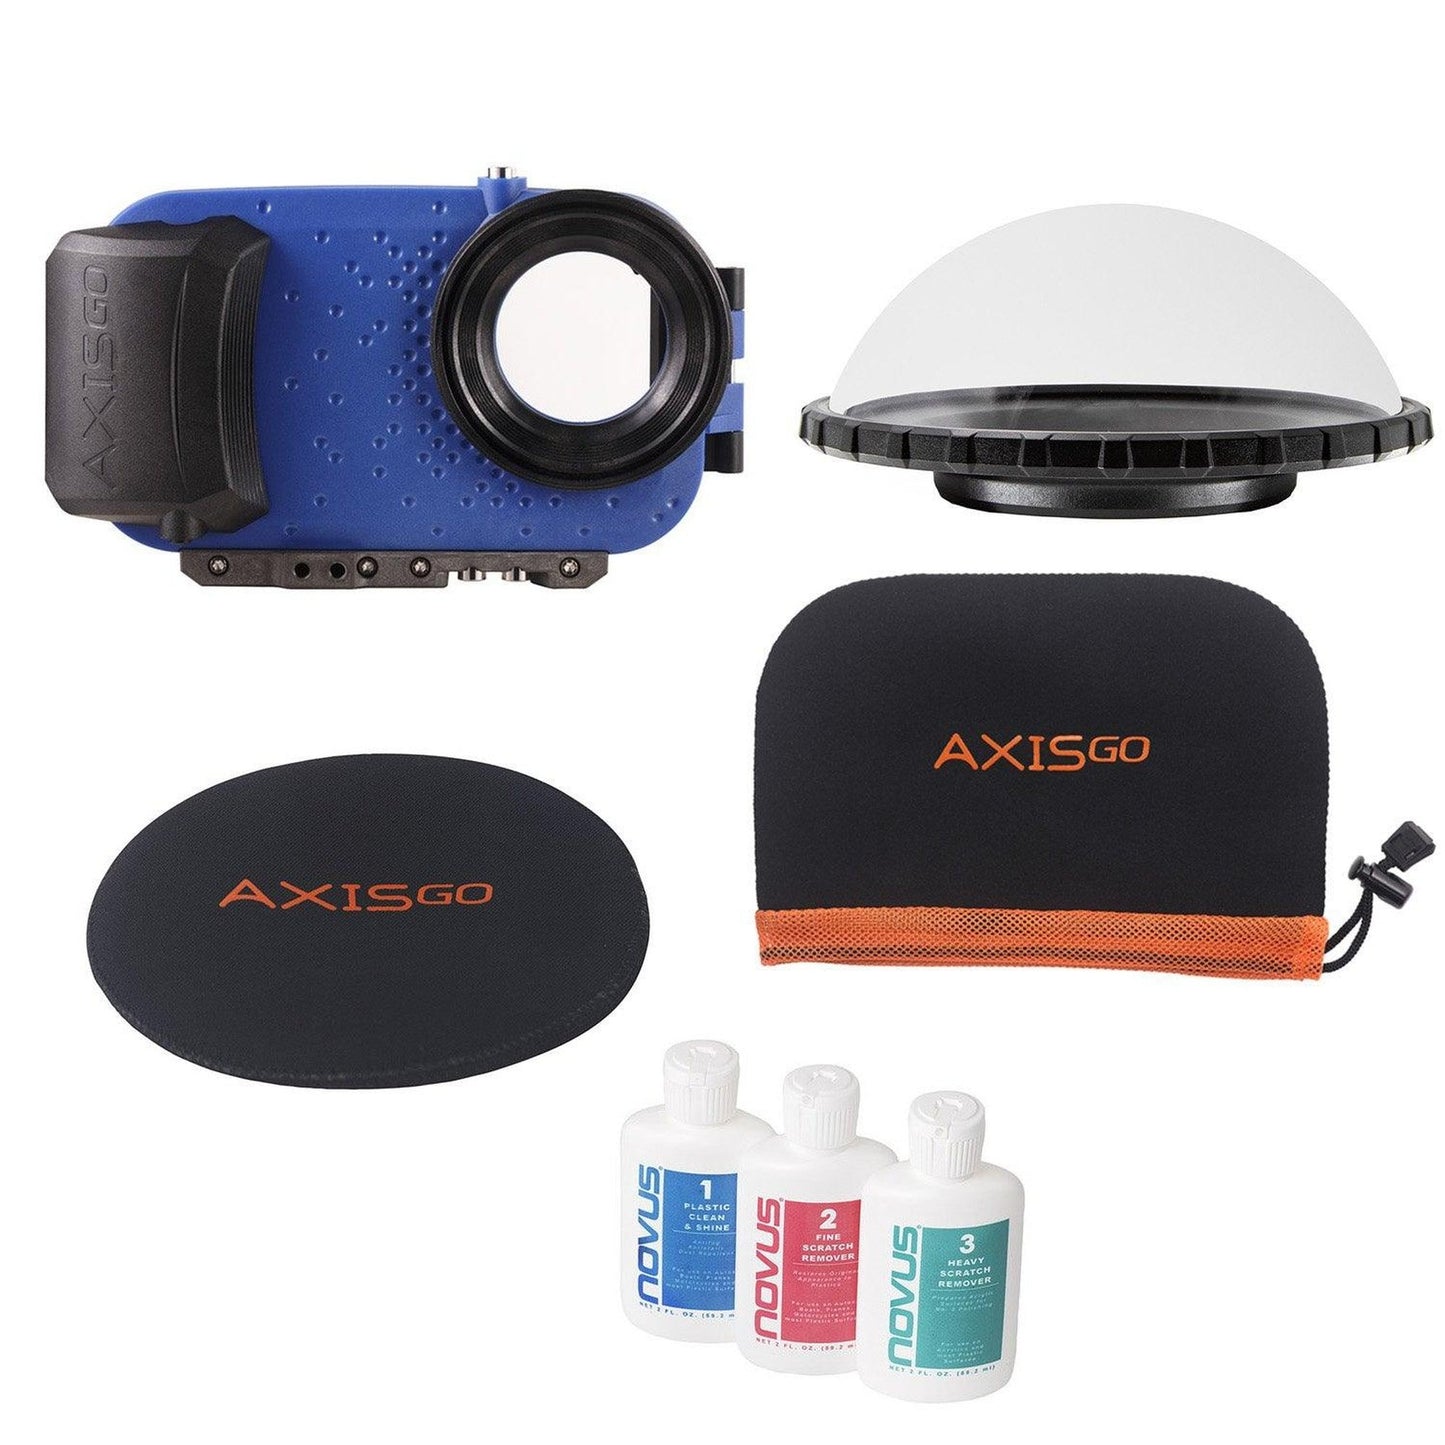 AxisGO 11 Pro Max Over Under Kit